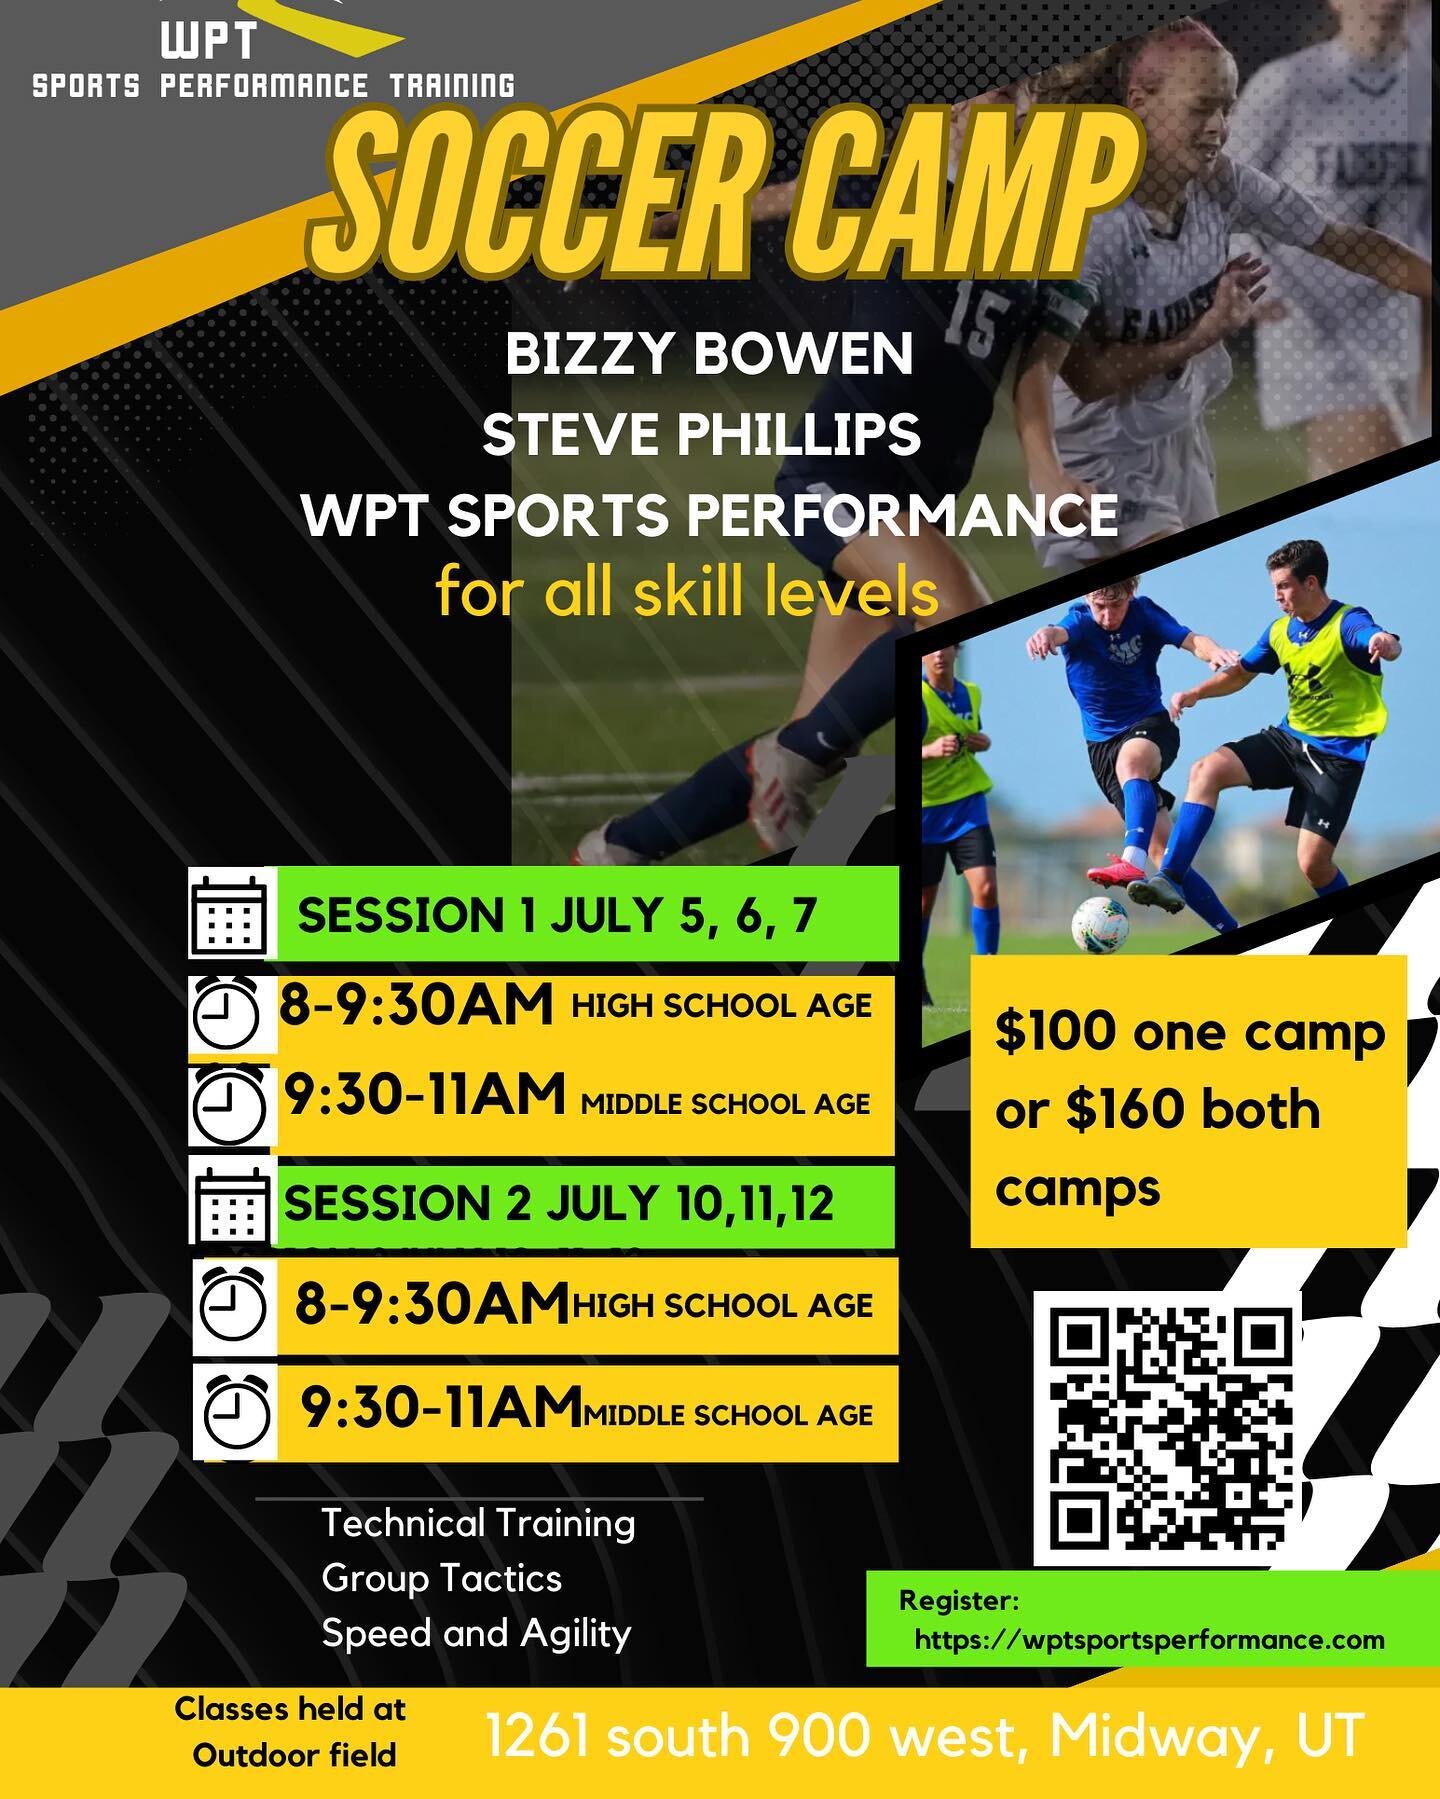 🔥 Exciting Summer Soccer Camp Alert! Join Bizzy Bowen, Steve Phillips, and WPT for an intensive program that covers all the essentials:

👟 Technical Skills: Dribbling, passing, receiving, shooting, and 1v1 play. Master the moves that will take your